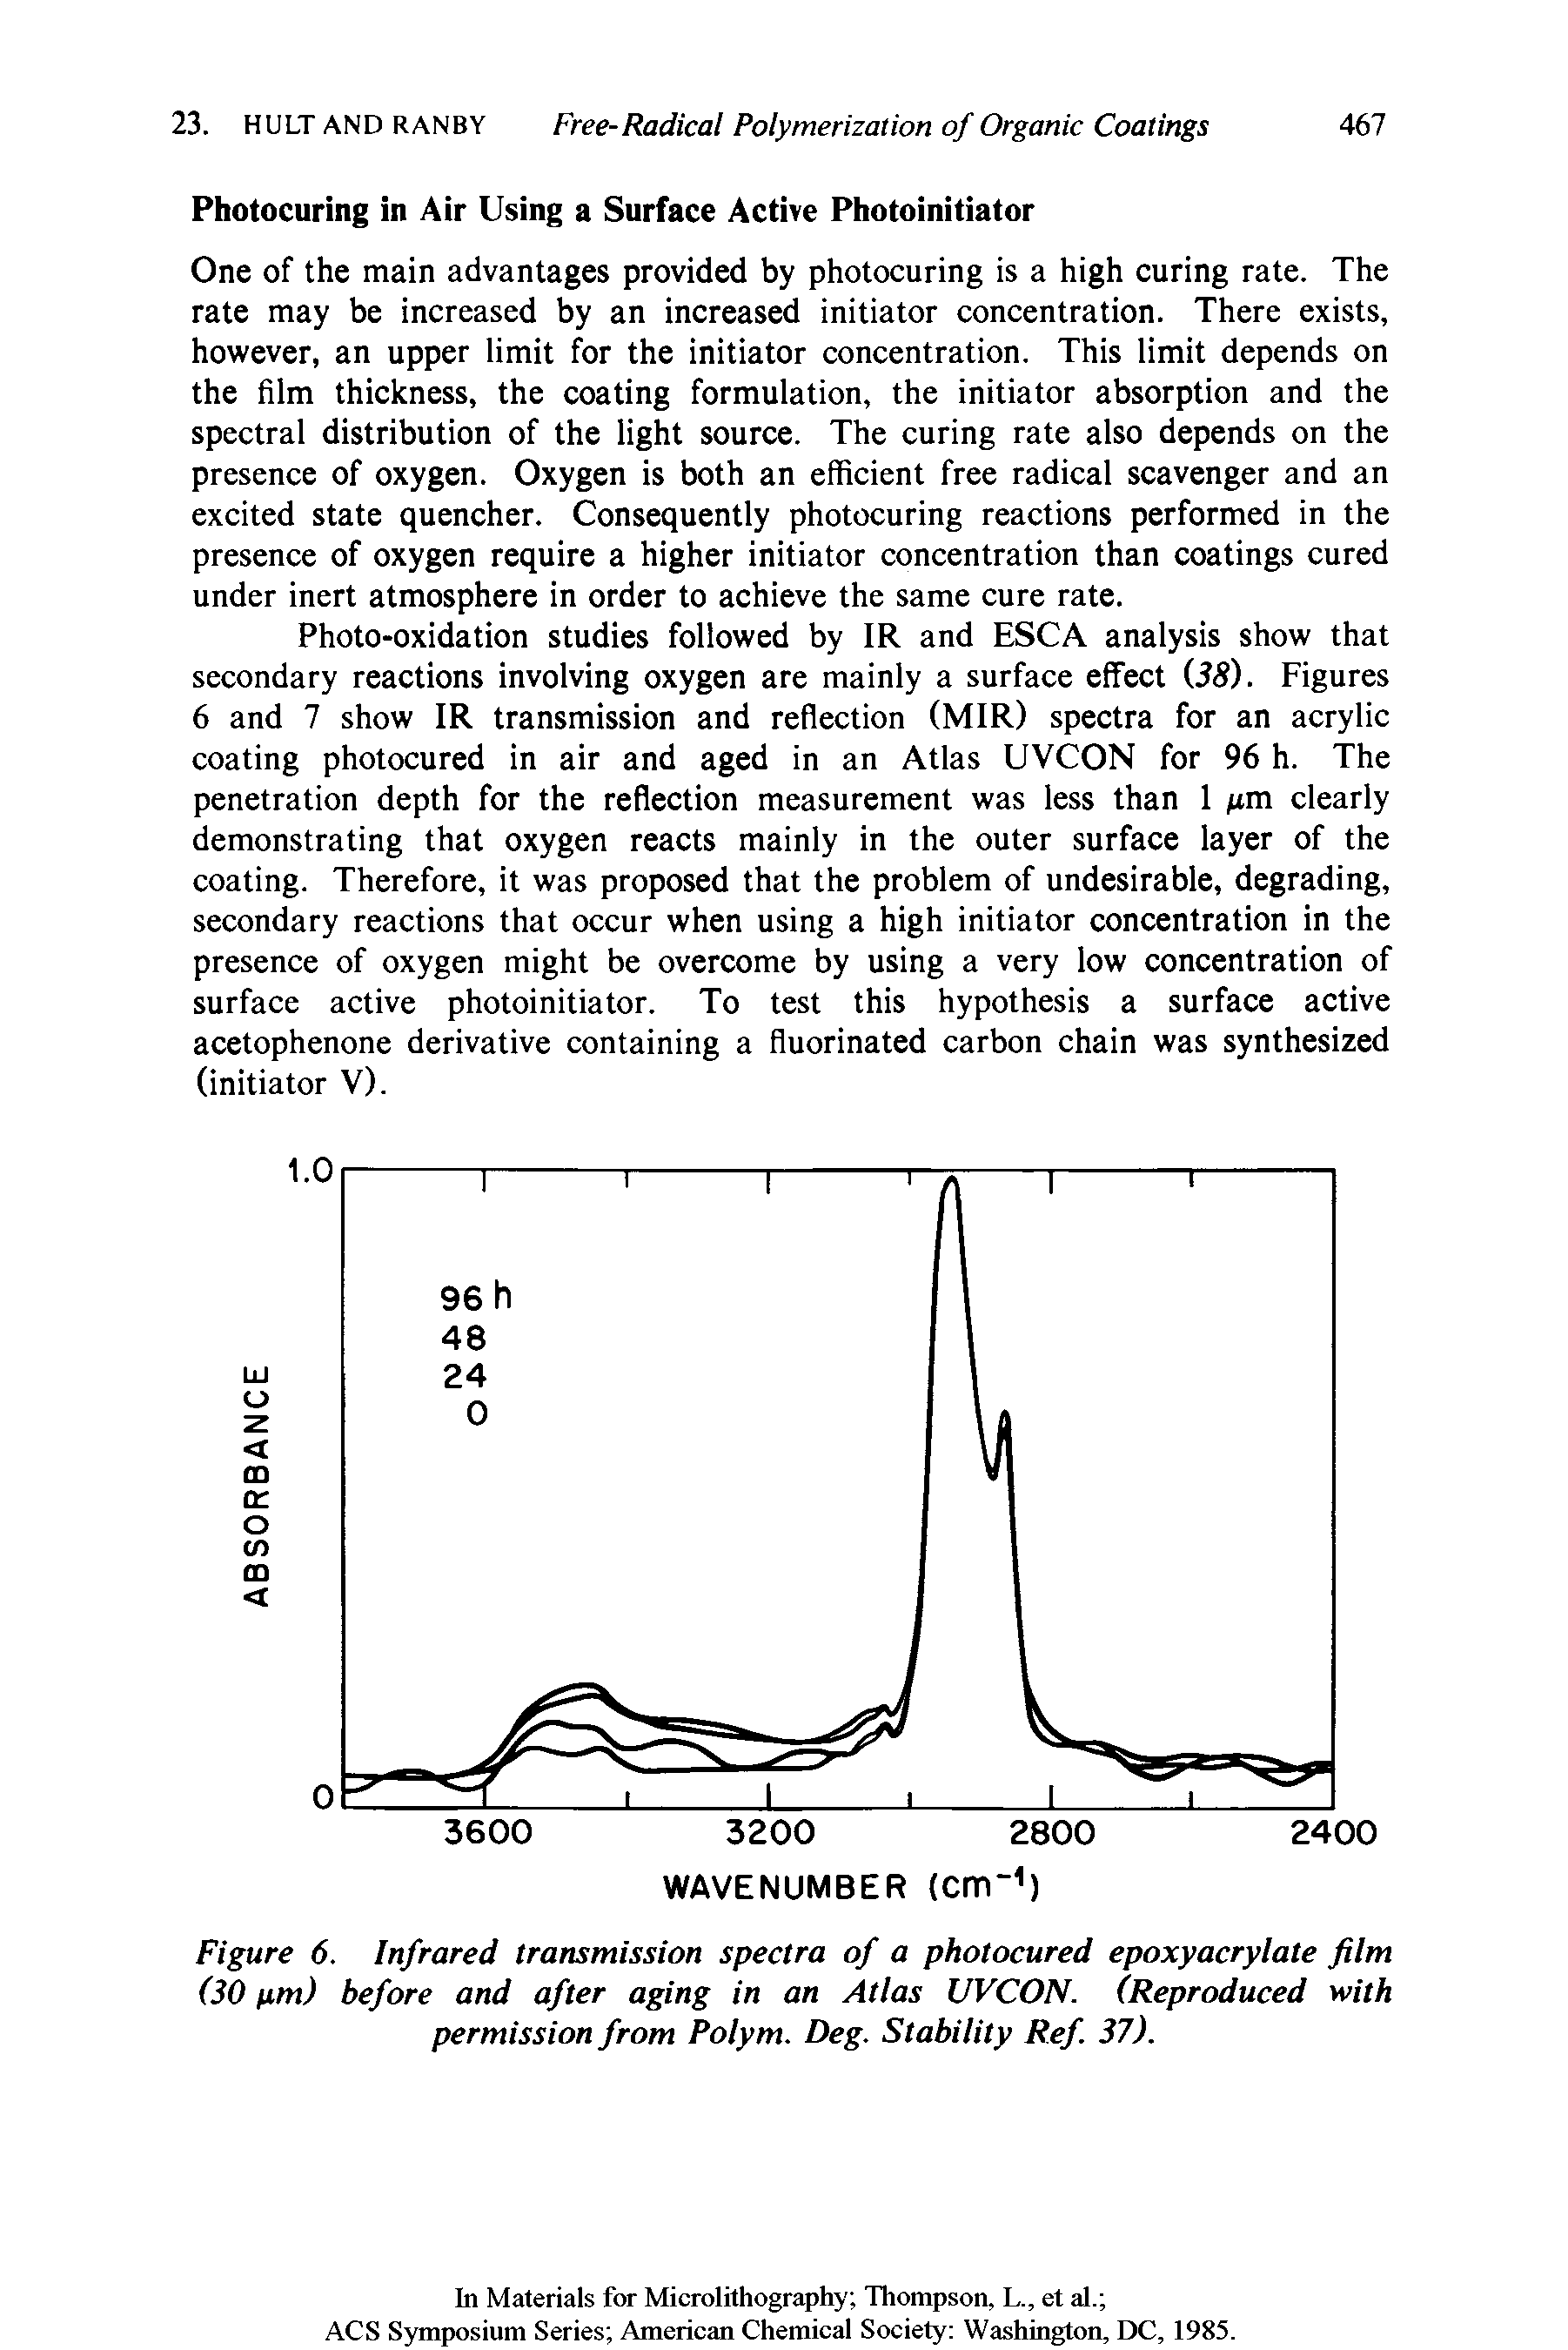 Figure 6. Infrared transmission spectra of a photocured epoxyacrylate film (30 ytm) before and after aging in an Atlas UVCON. (Reproduced with permission from Polym. Deg. Stability Ref. 37).